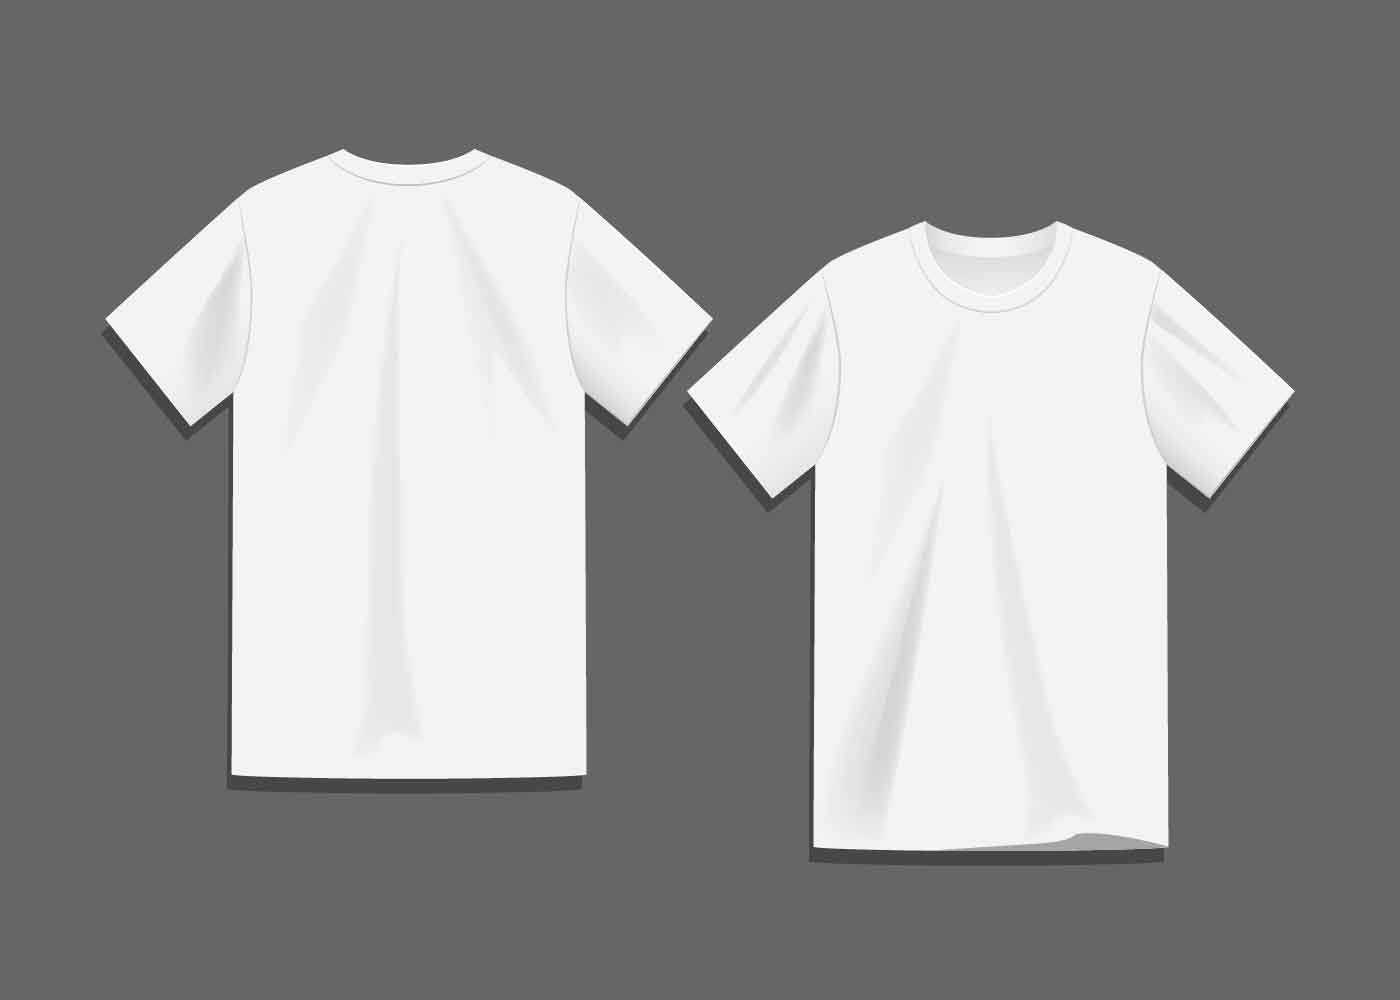 White Blank T Shirt Template Vector – Download Free Vectors Inside Blank Tee Shirt Template